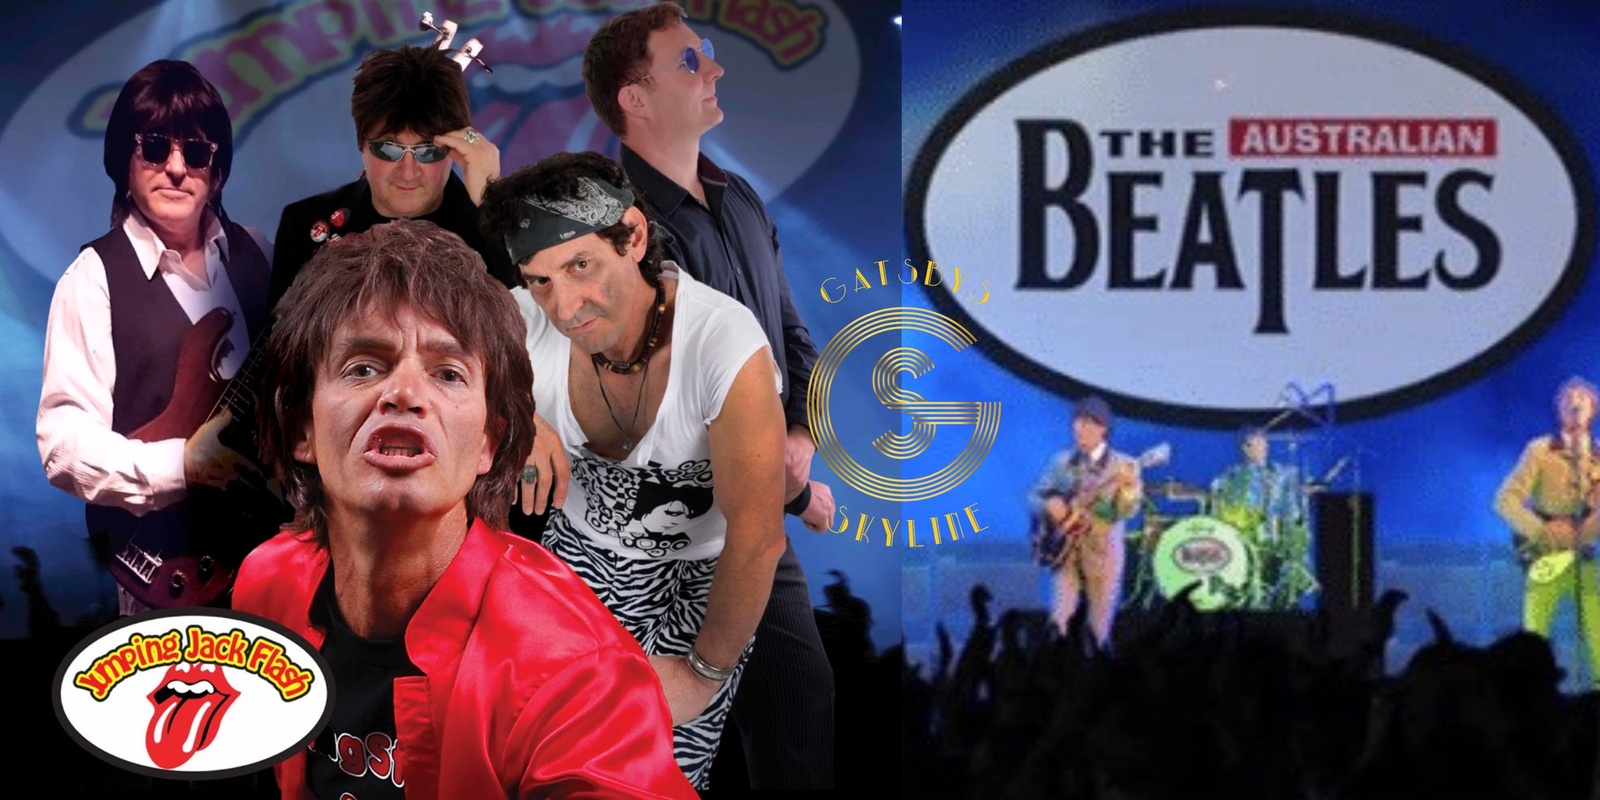 Banner image for The Australian Beatles and Jumping Jack Flash